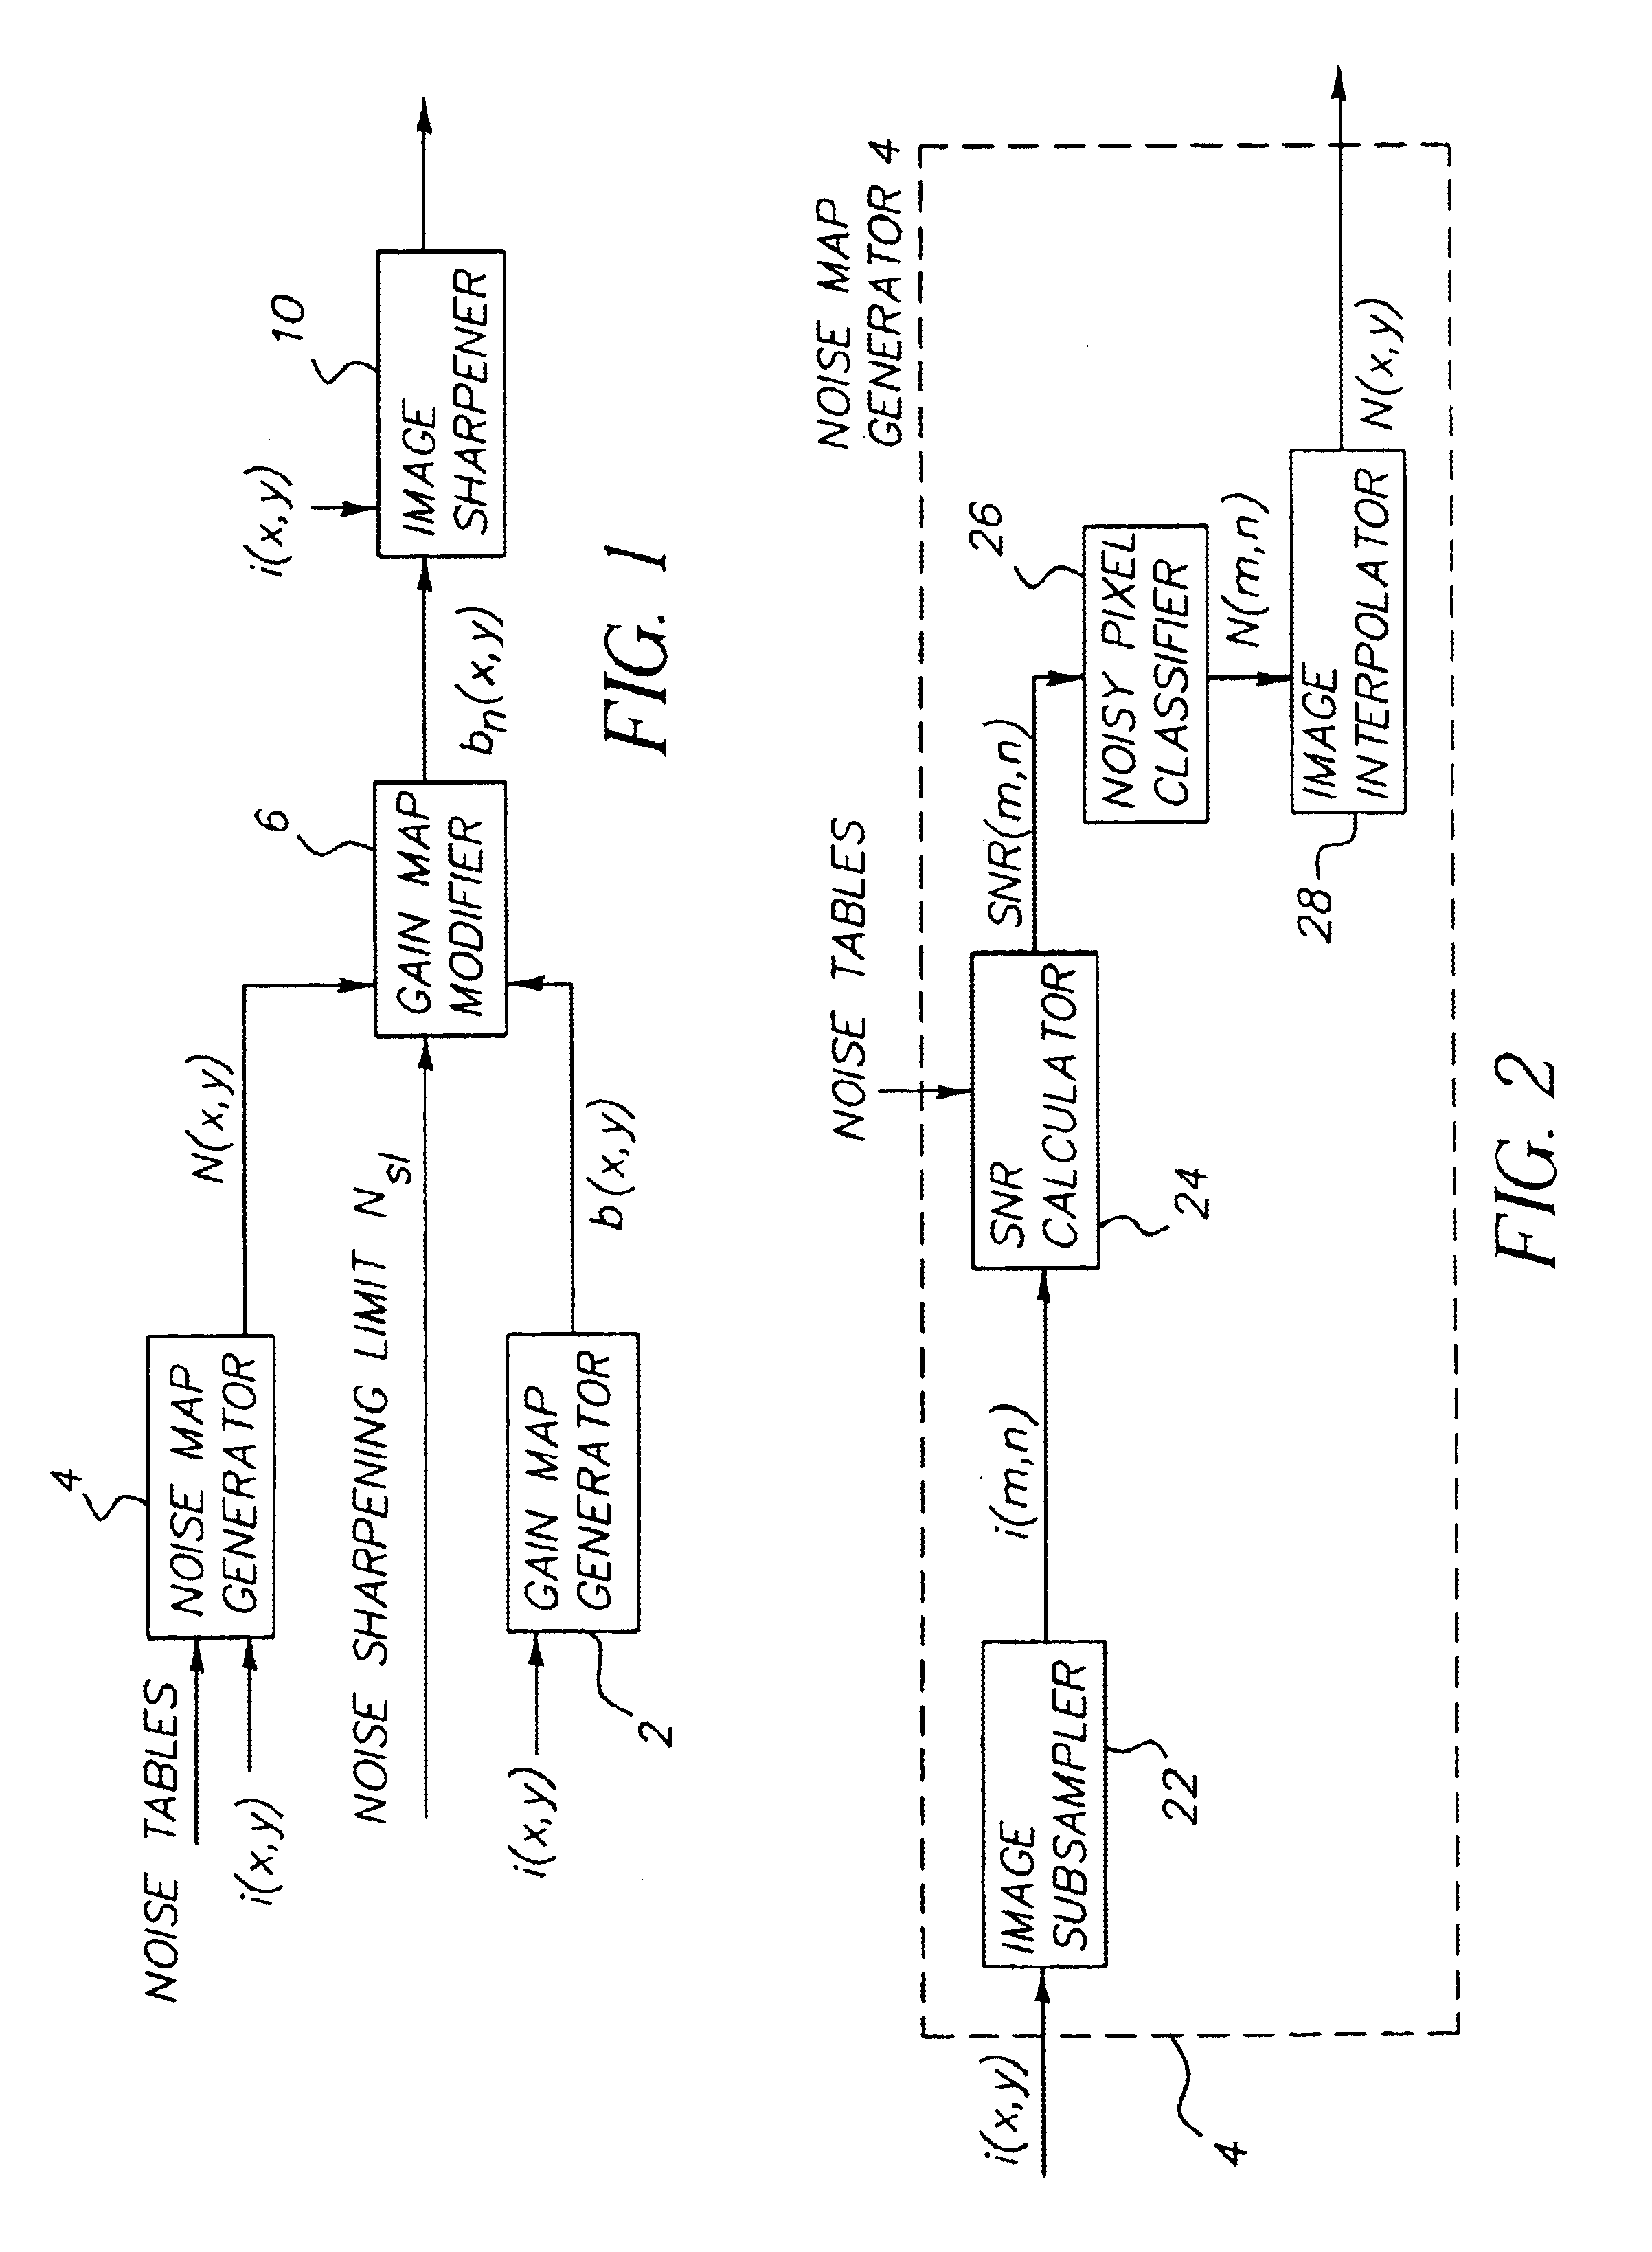 Method for sharpening a digital image without amplifying noise